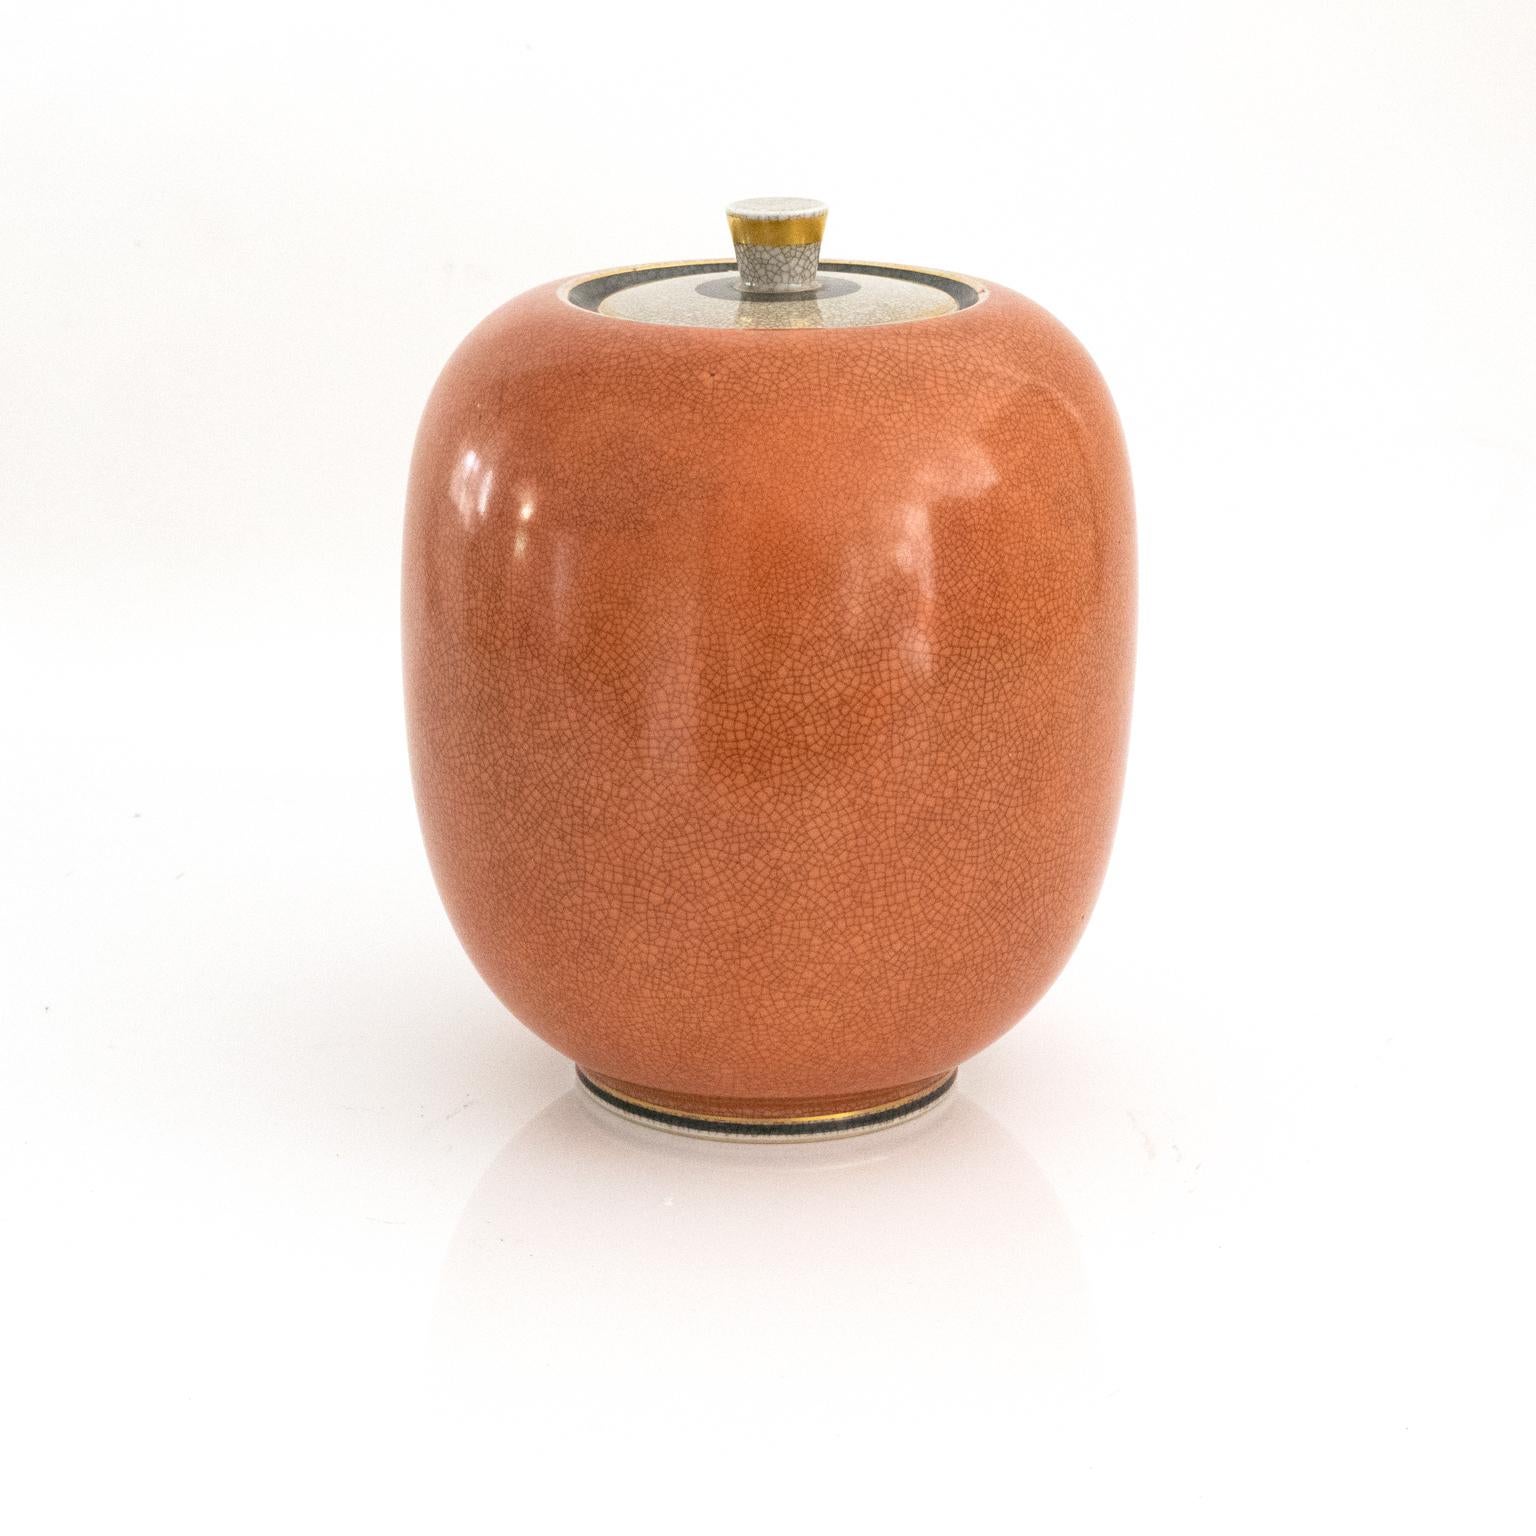 Large Royal Copenhagen ceramic jar in coral and white (craquelure) crackle glaze and detailed in gold. Made in Denmark, circa 1940s.

Measures: Height 10